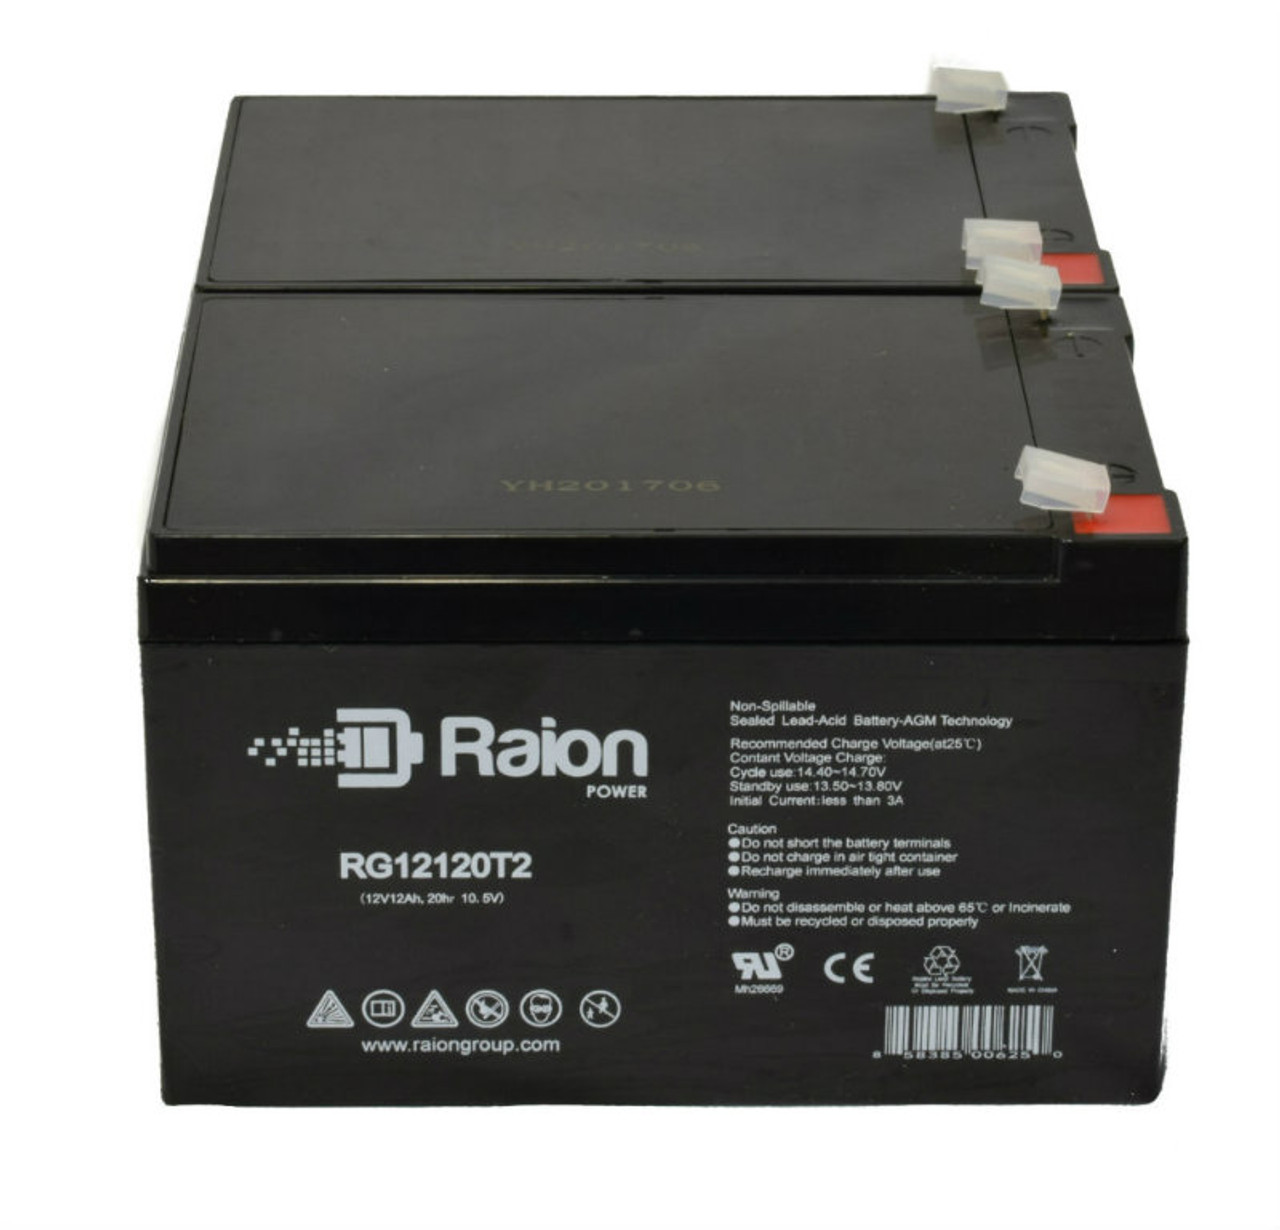 Raion Power 12V 12Ah Non-Spillable Compatible Replacement Battery for IBT Technologies BT12-12HR - (2 Pack)